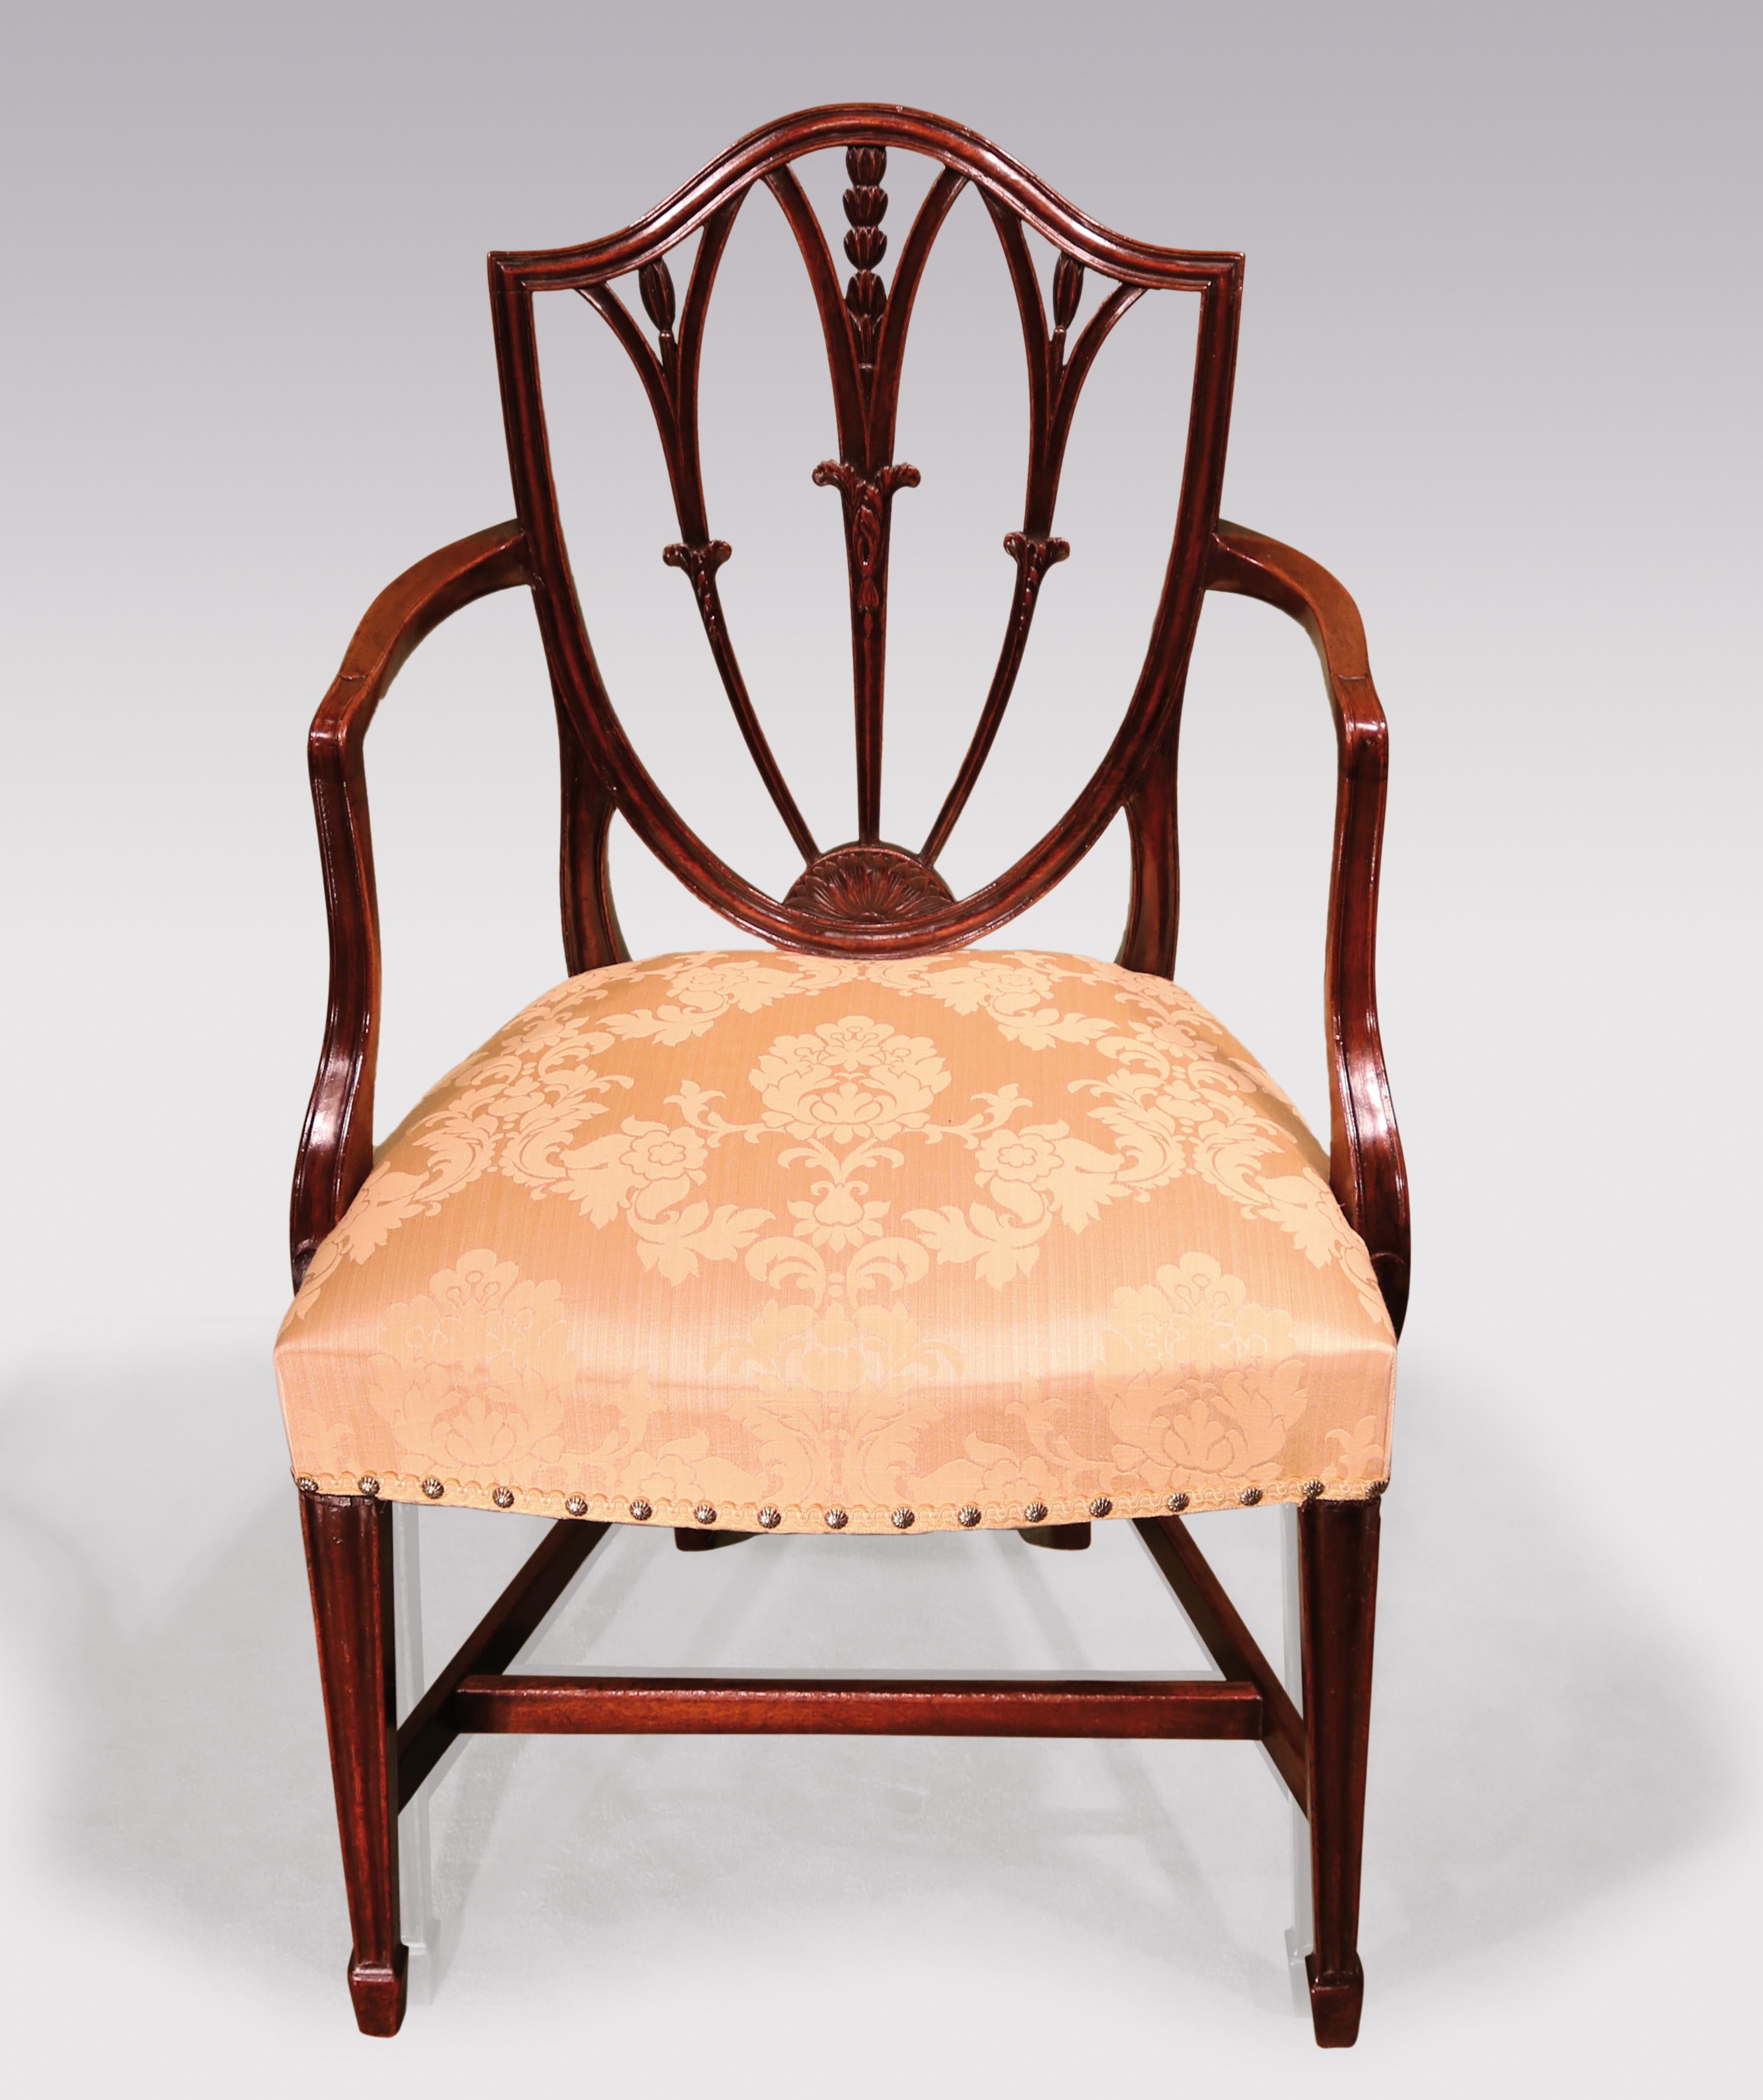 A late 18th century Hepplewhite period mahogany armchair having moulded shield shaped back enclosing triple splats carved with leaves and husks radiating from sunburst panel. The chair having moulded set-back arms, supported on moulded square